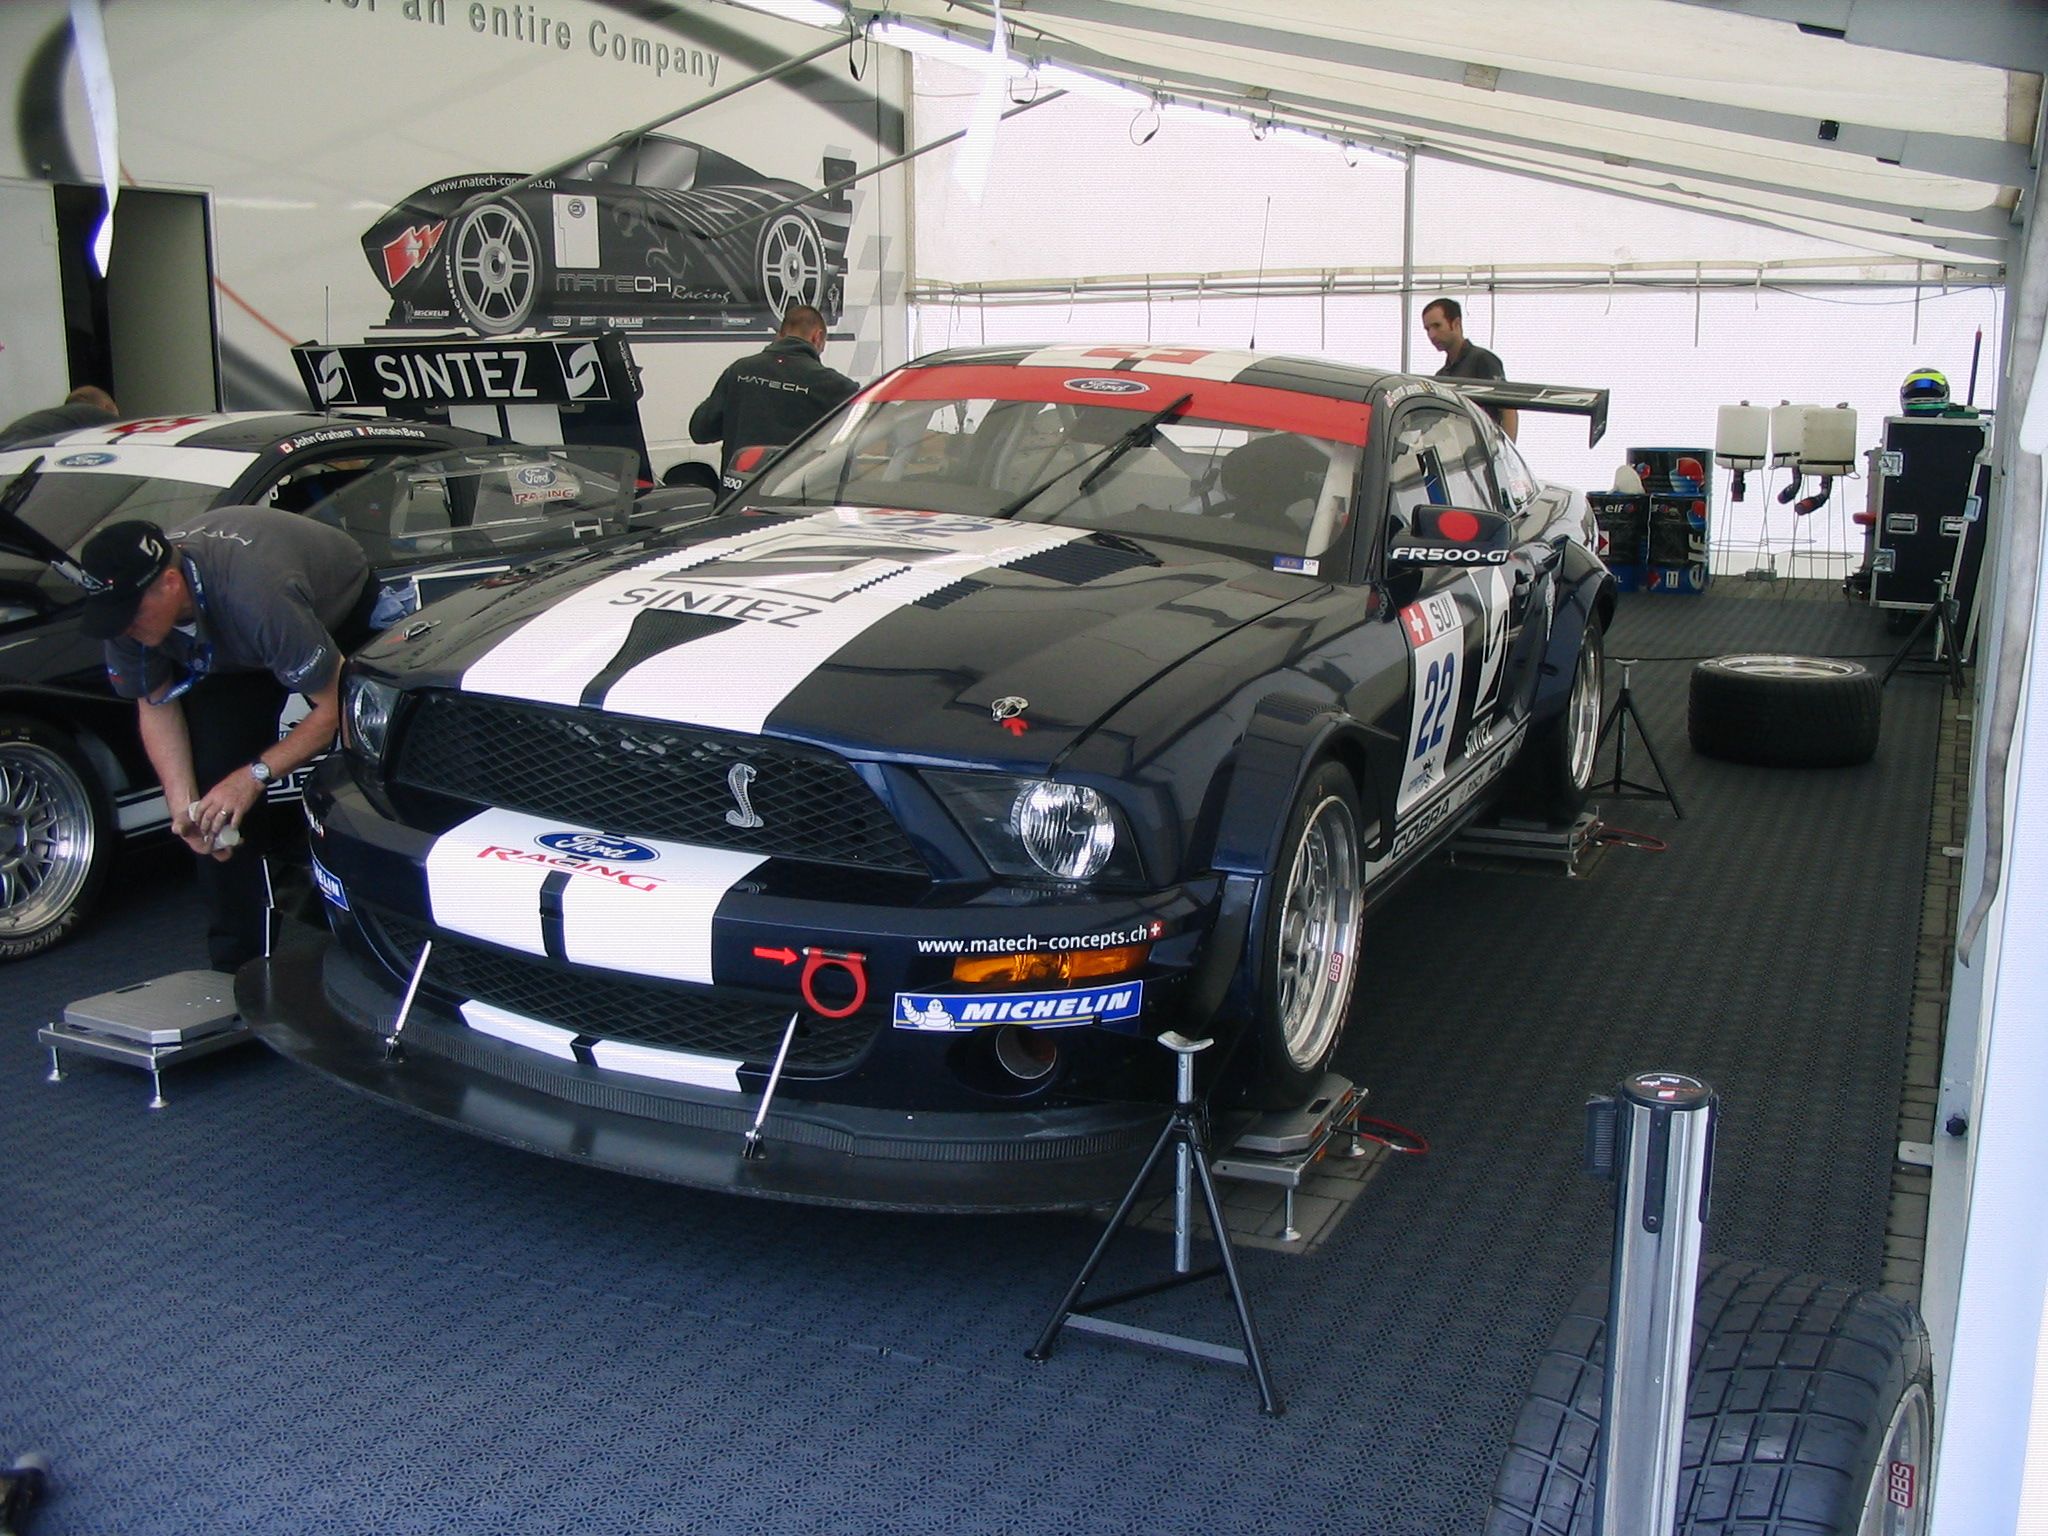 The Ford Mustang FR500GT. 